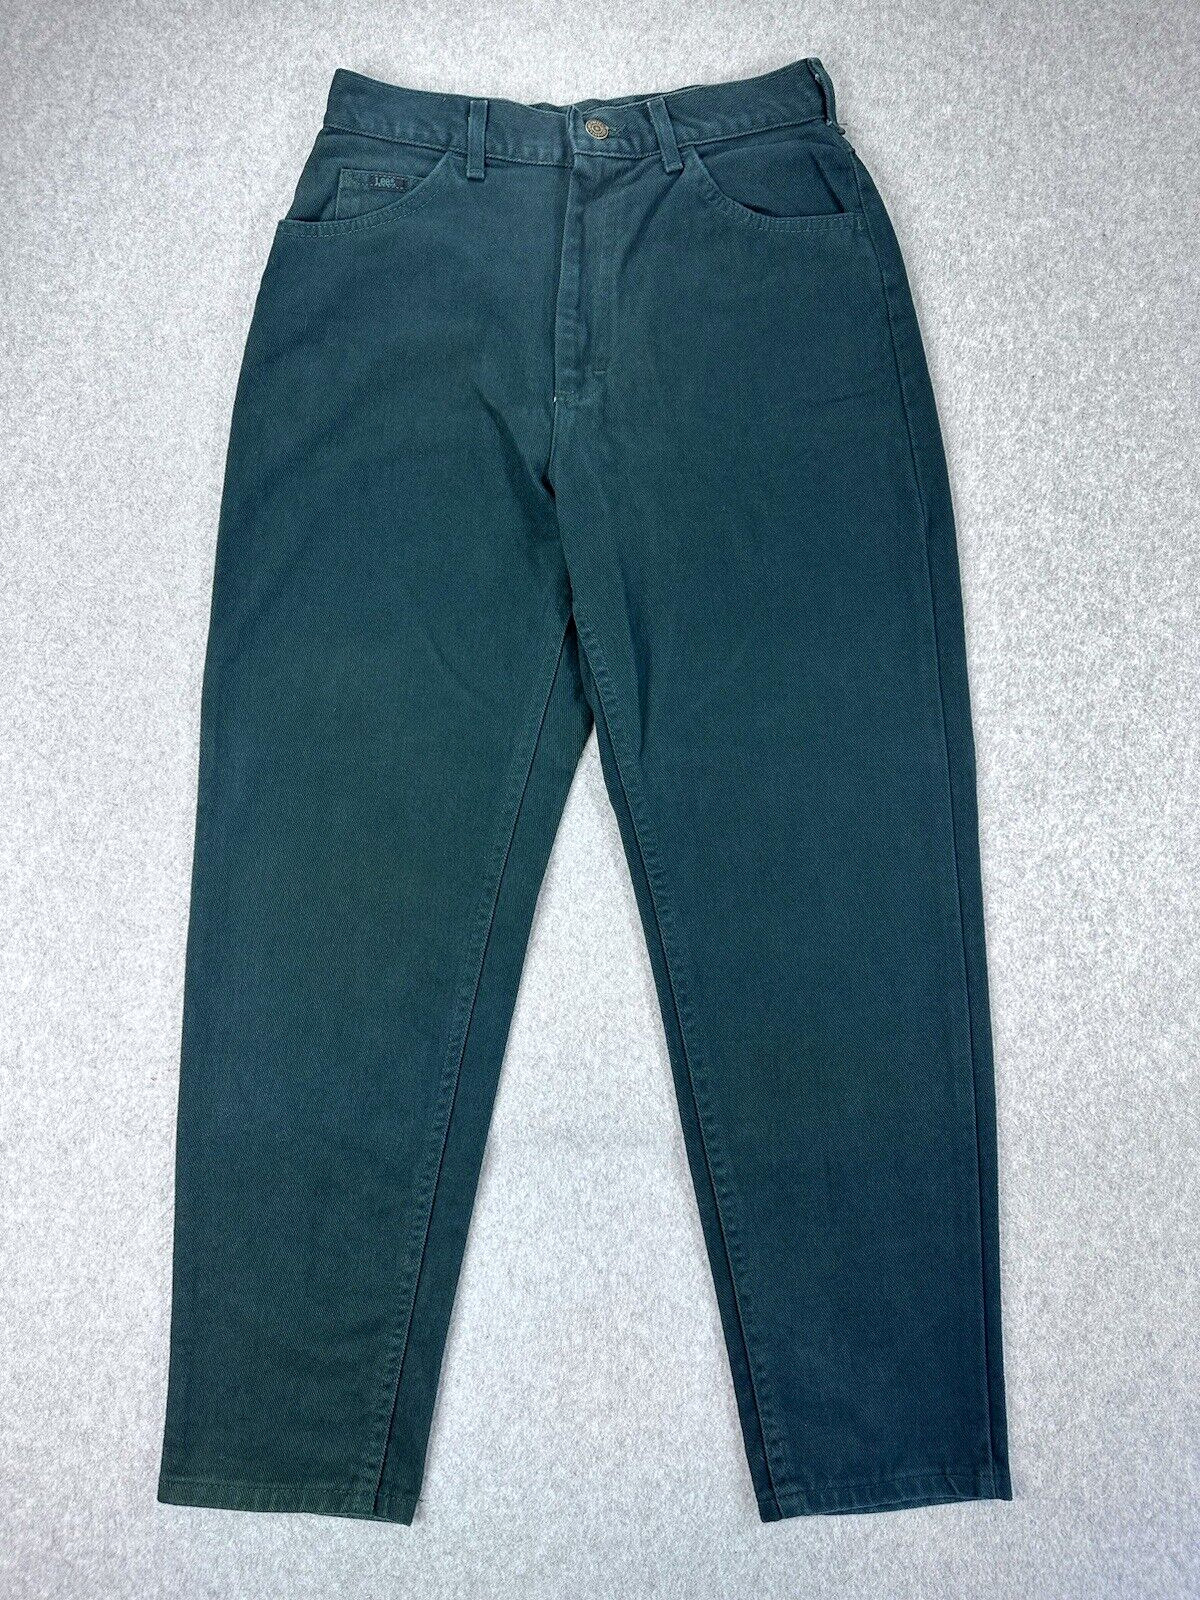 Vintage Lee Jeans Women 10 Petite High Rise Green Tapered 28x28 USA Western